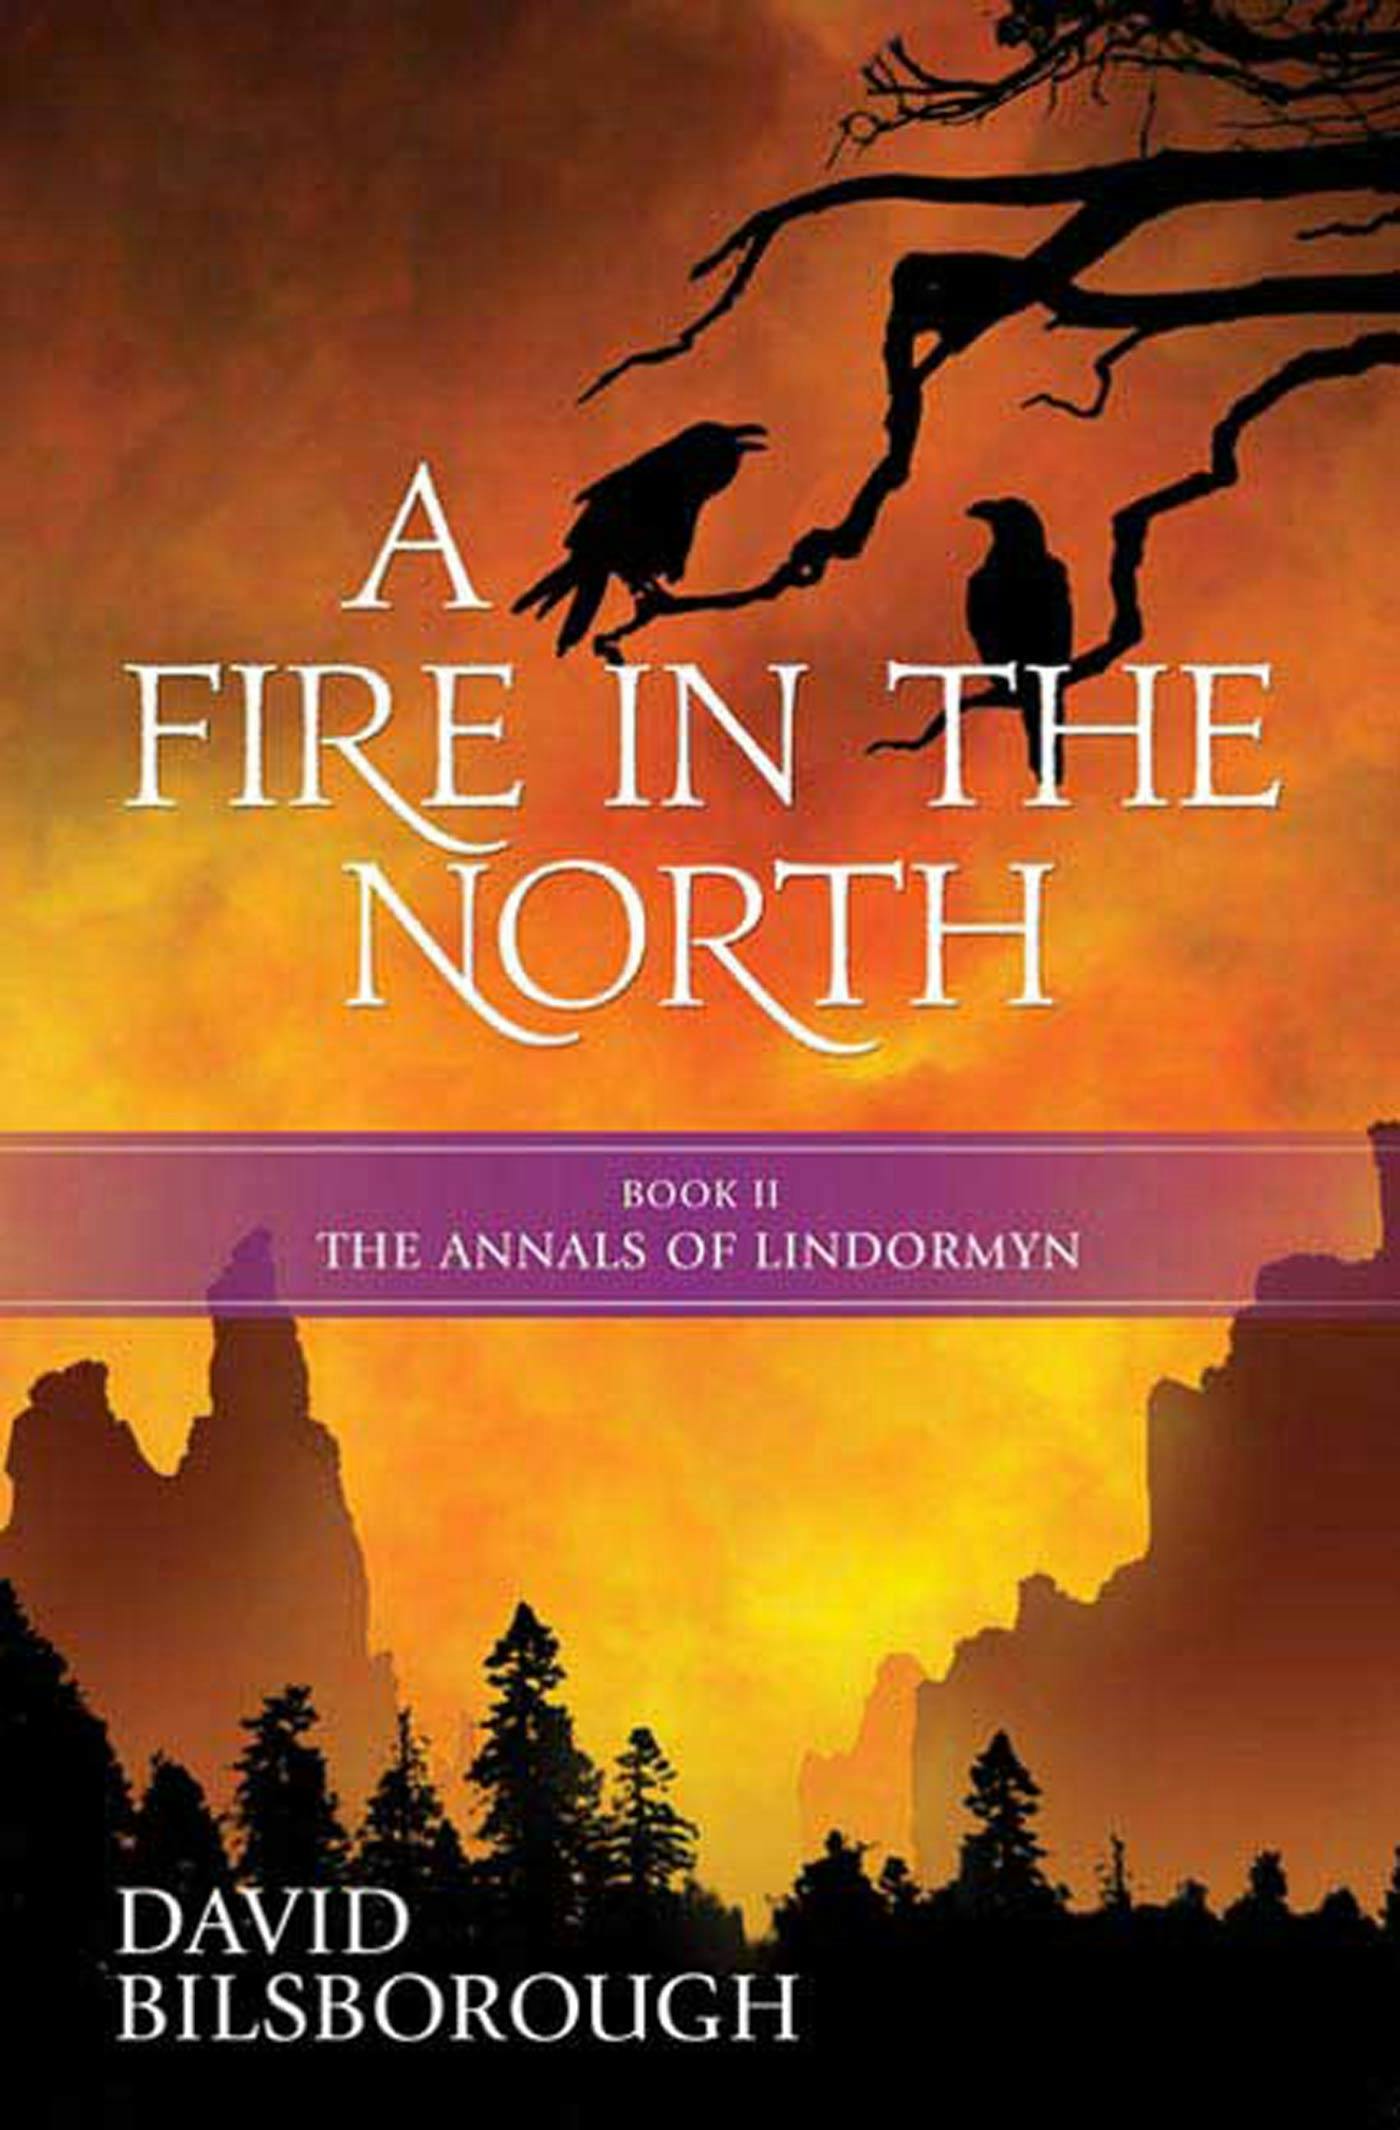 Fire in the North